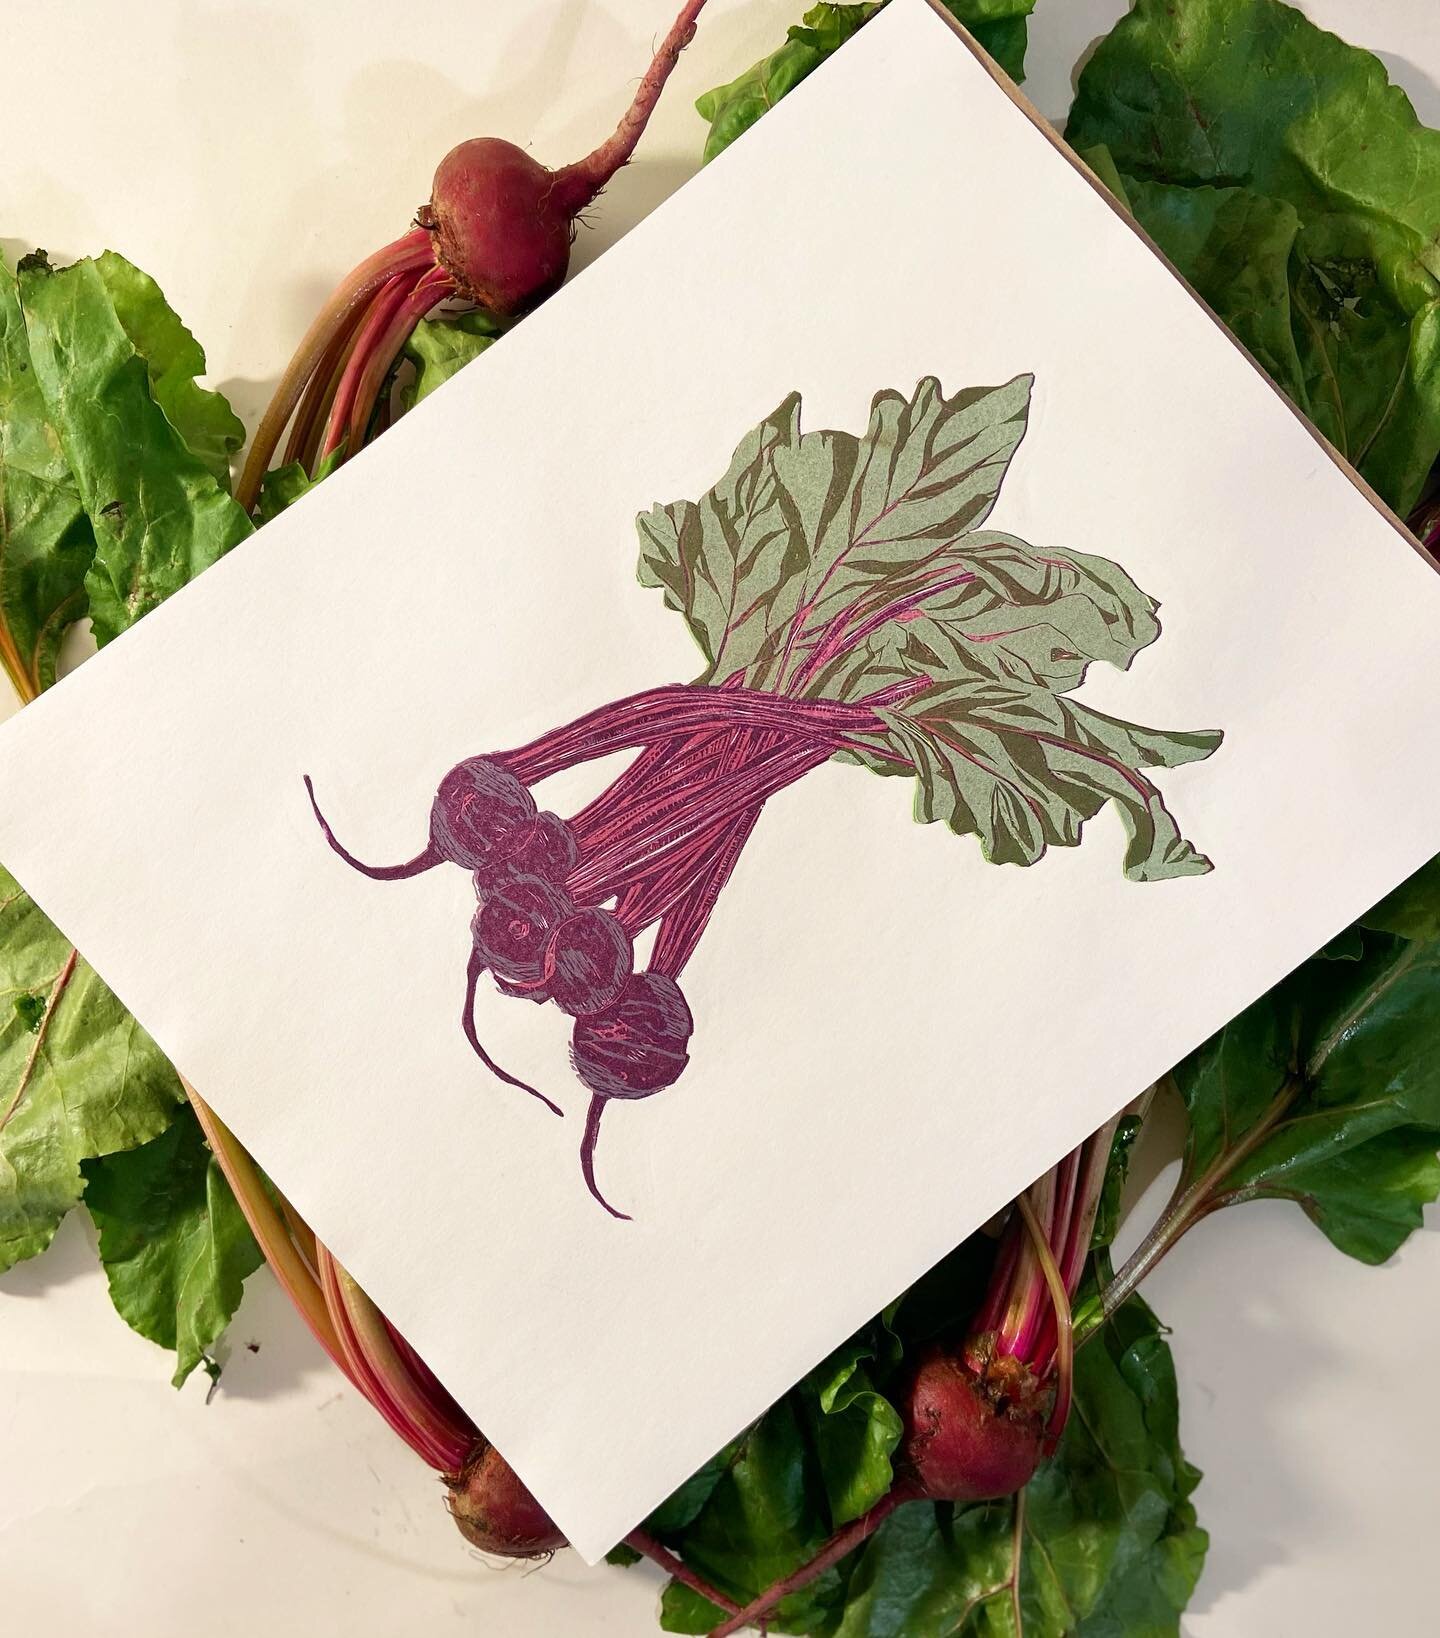 Beet It. 11x14 limited edition 5 color reduction print. All new prints are now available in my online shop! Enjoy 10% off with code FRIENDSANDFAM10 :) Link in bio. Thanks y&rsquo;all 👩🏻&zwj;🌾

#printmaking #printmakersofinstagram #printmaker #redu